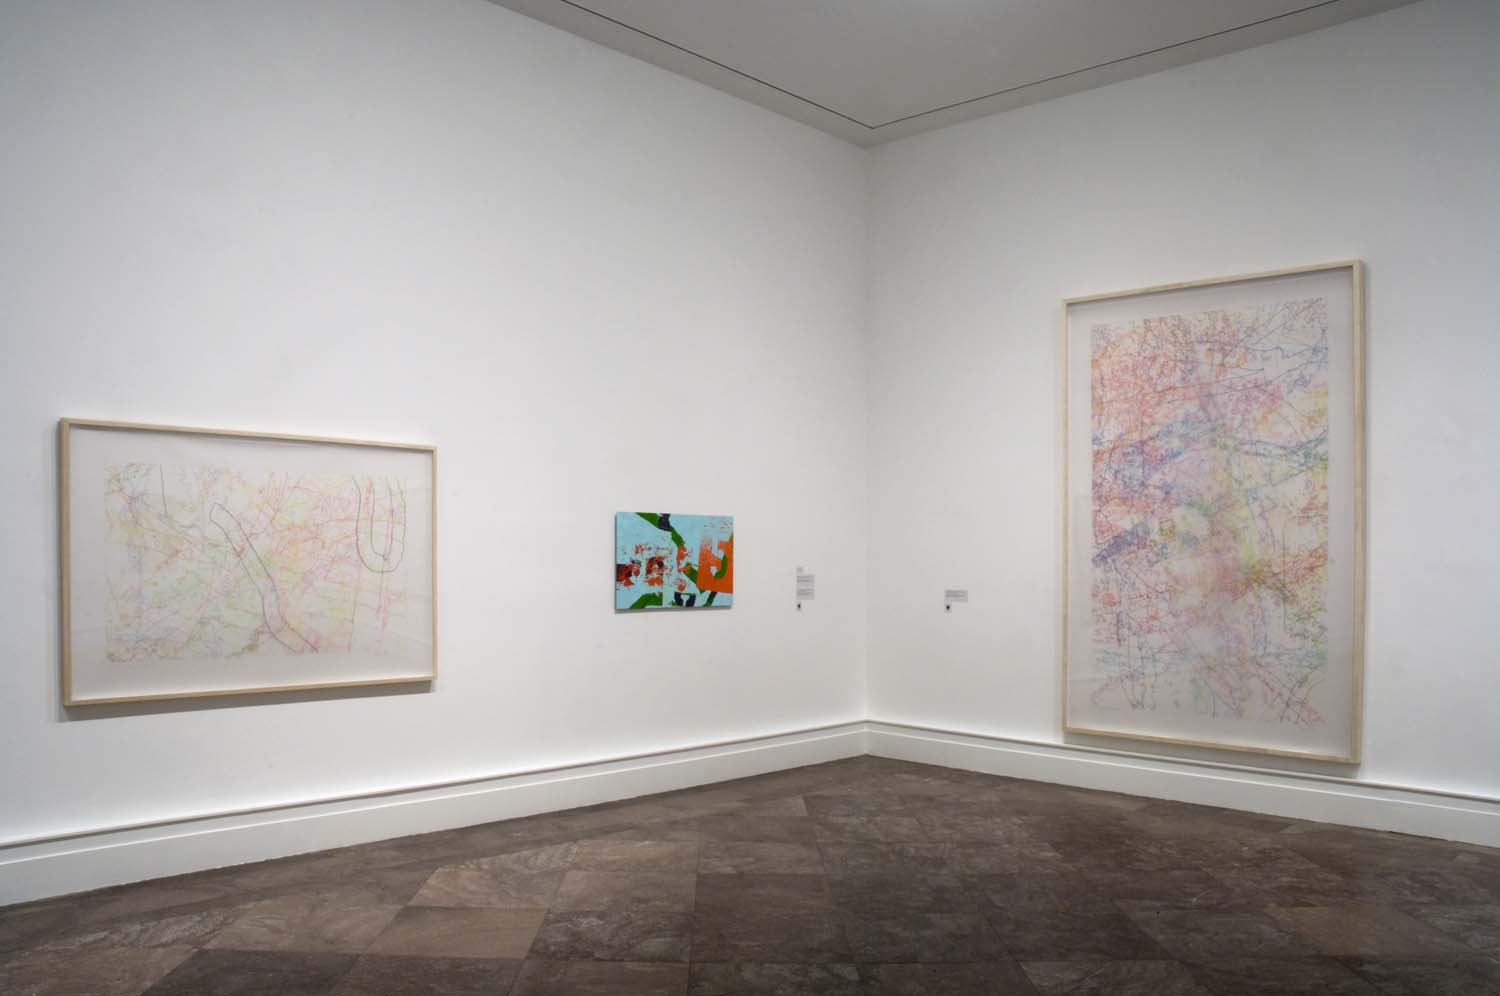 Albright Knox Art Gallery, installation view of "Ingrid Calame: Step on a Crack", 2009